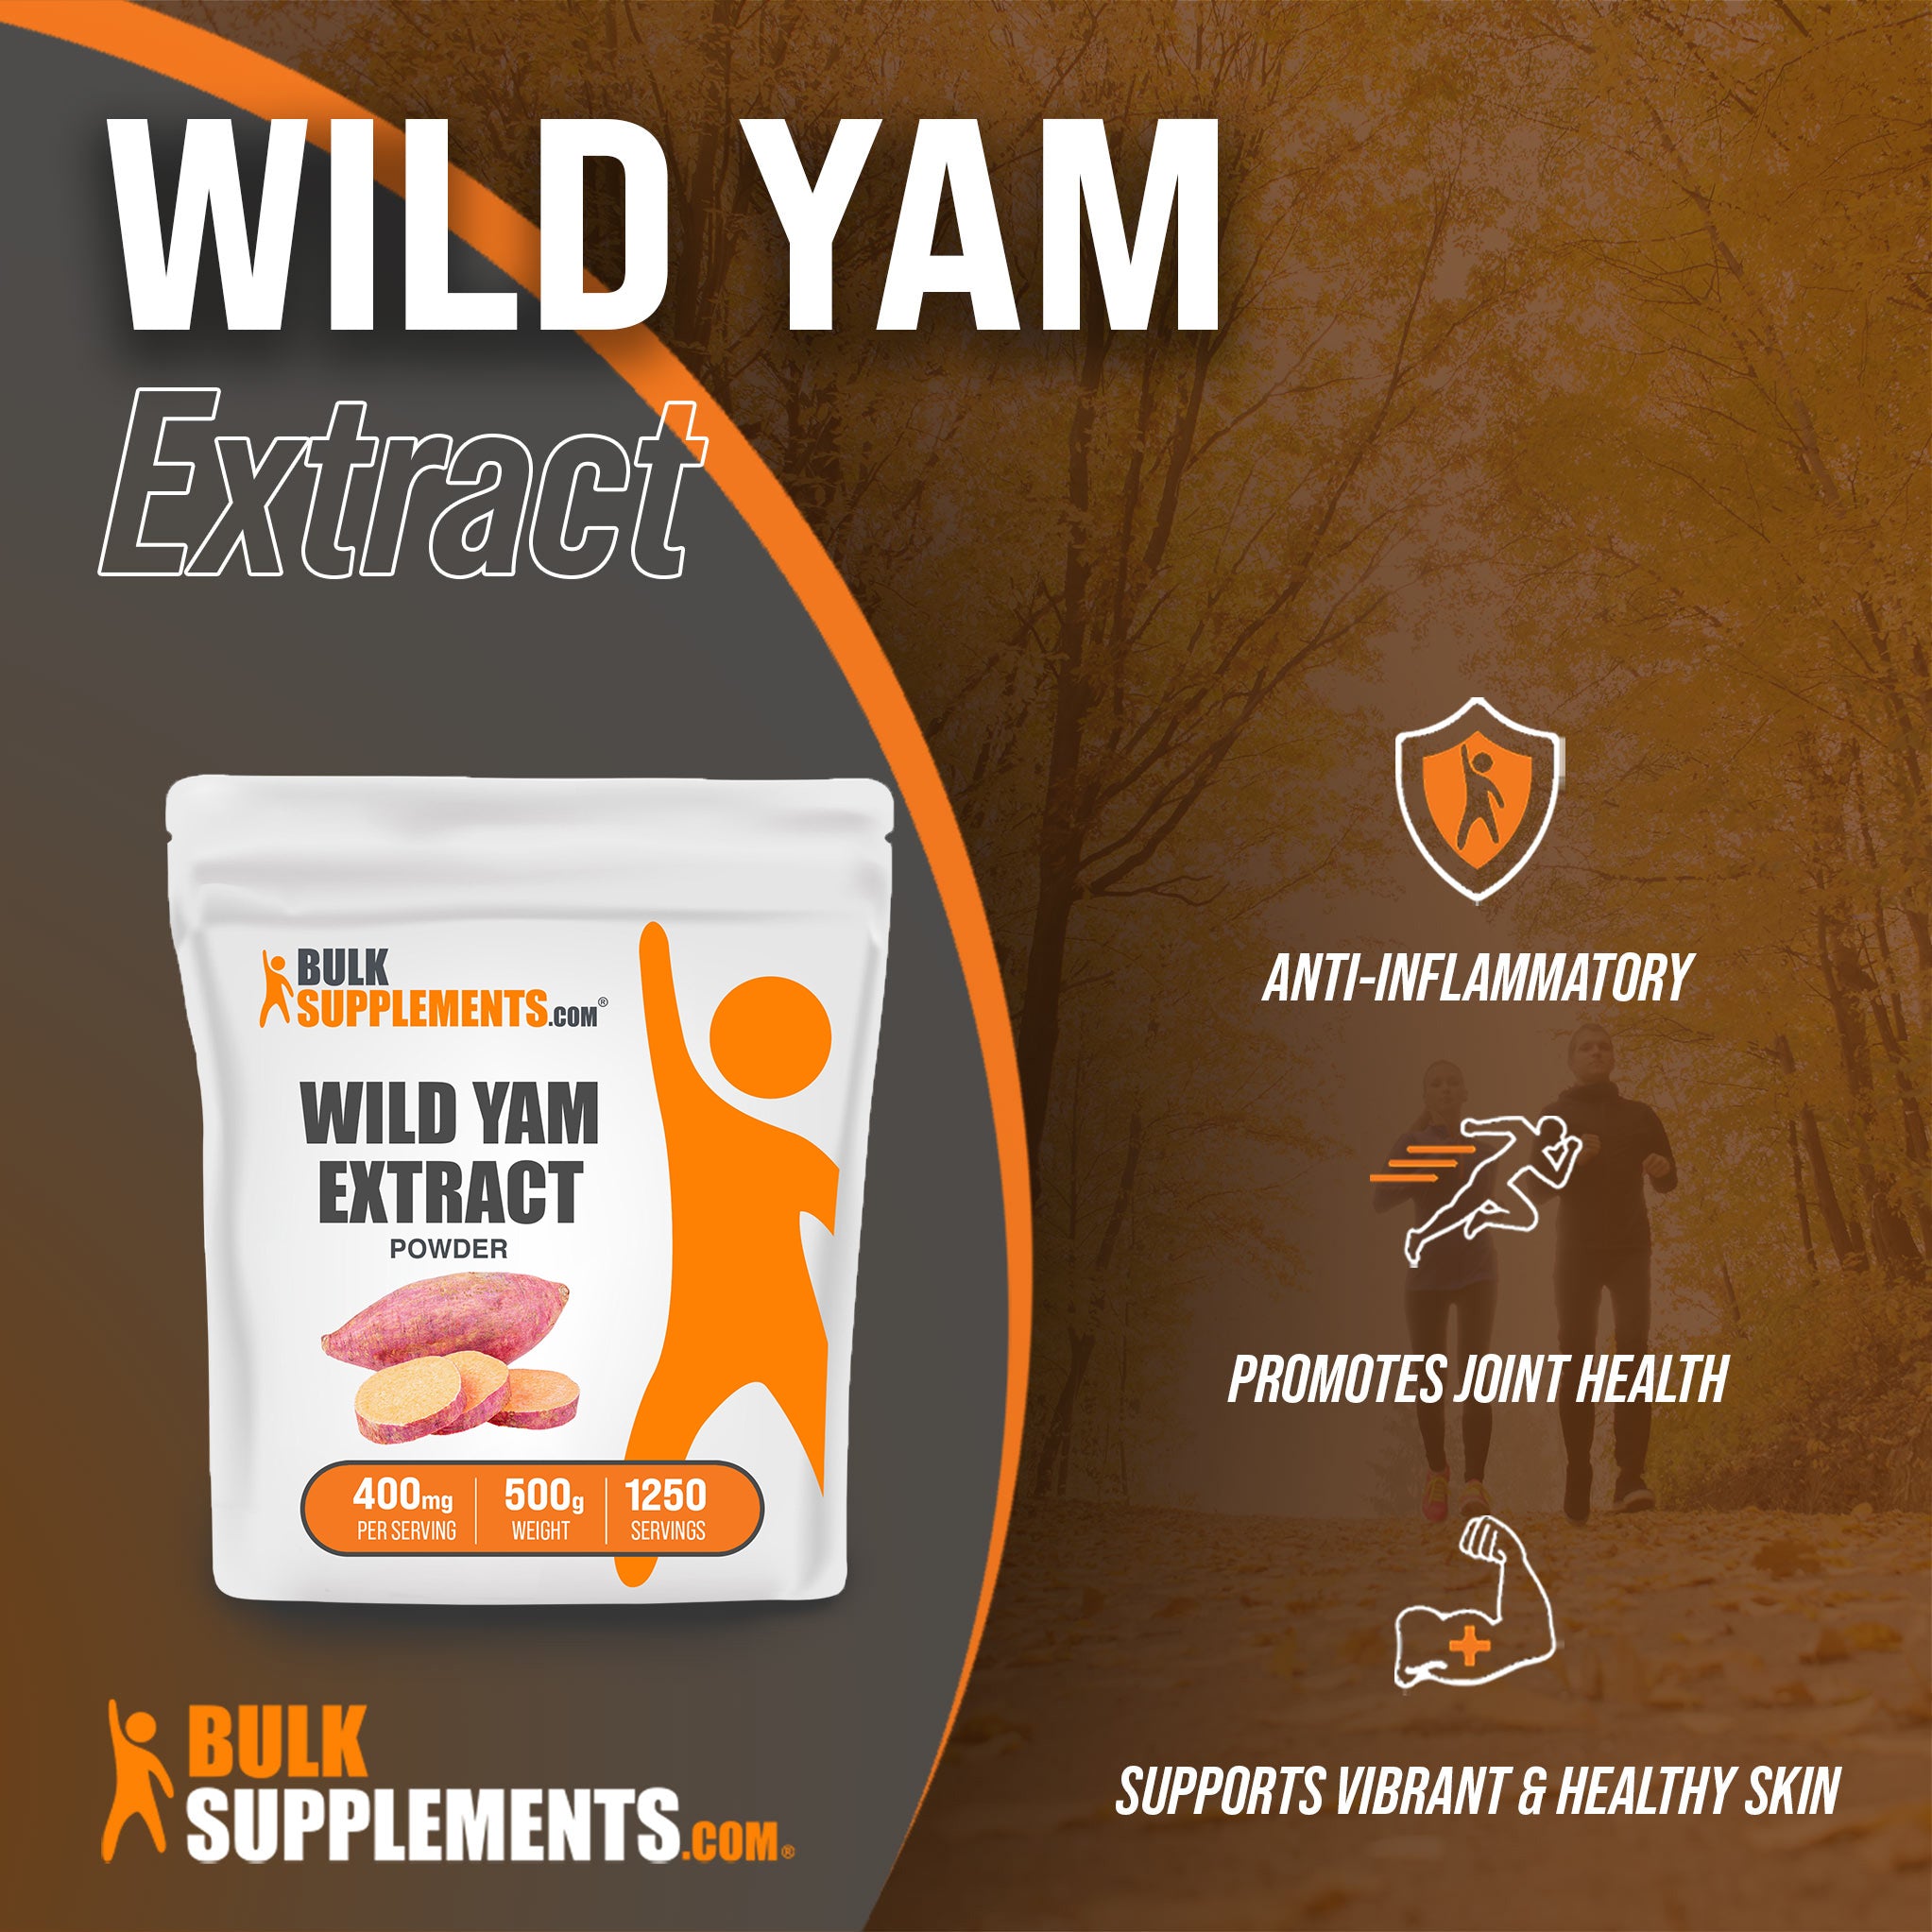 Benefits of Wild Yam Extract: anti-inflammatory, promotes joint health, supports vibrant and healthy skin